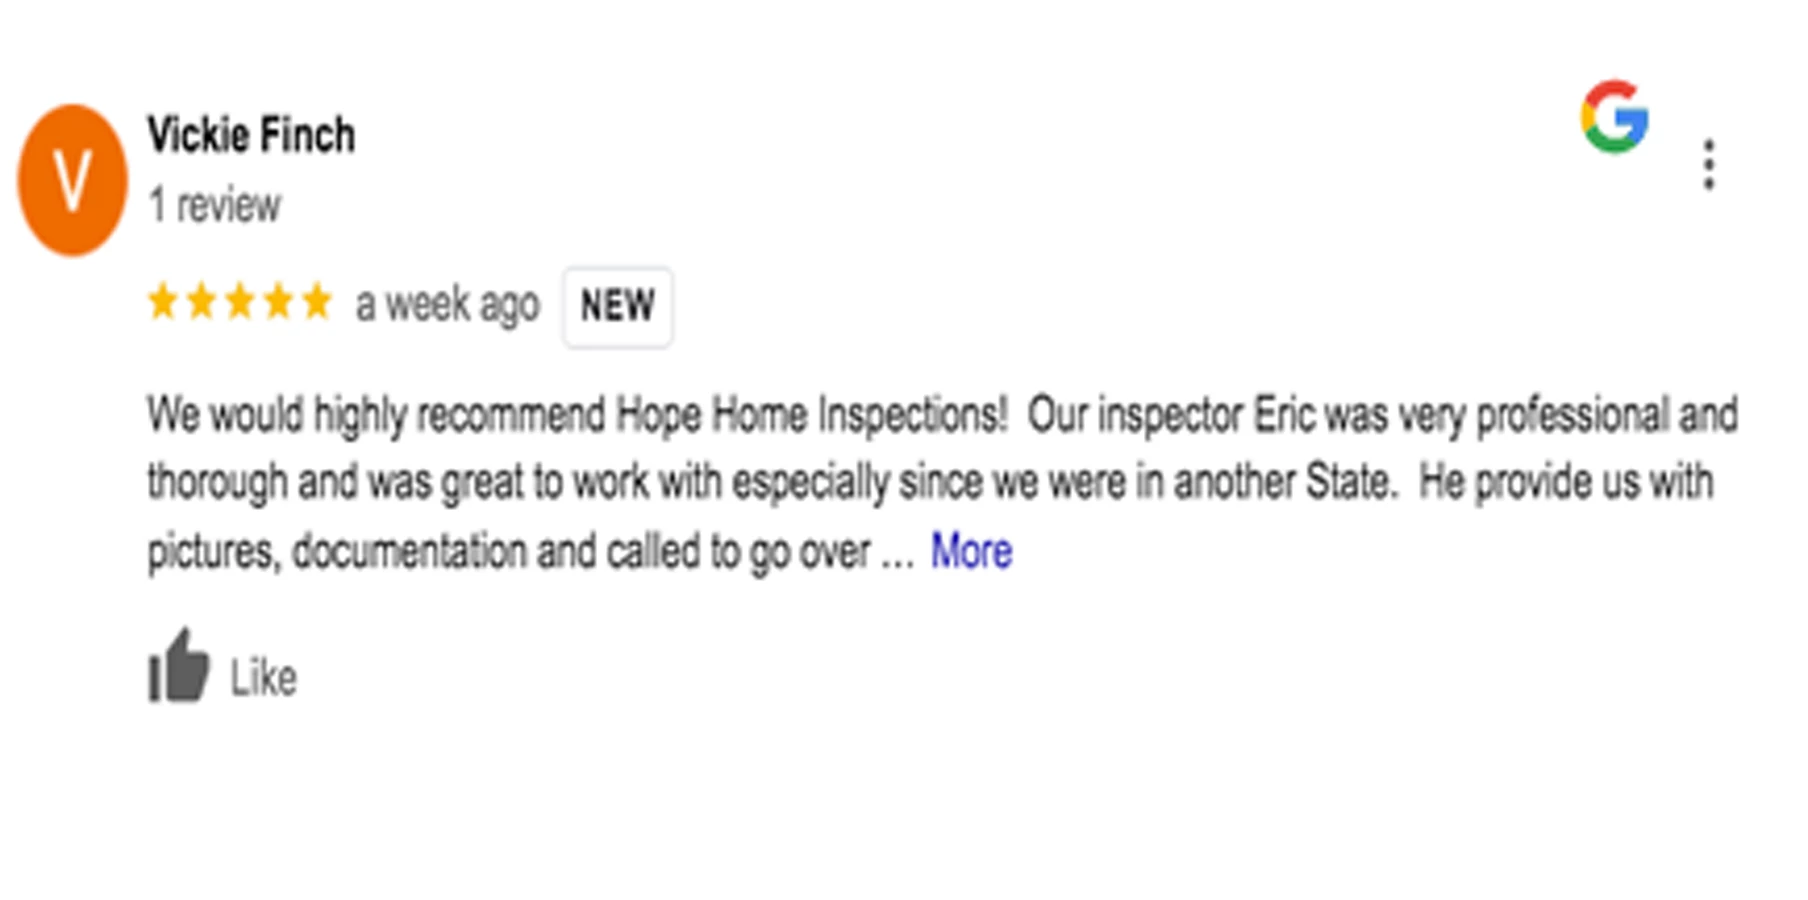 "Image: A 5-star Google customer review from Sarasota, praising Mold Check and Inspect's service excellence and satisfaction."